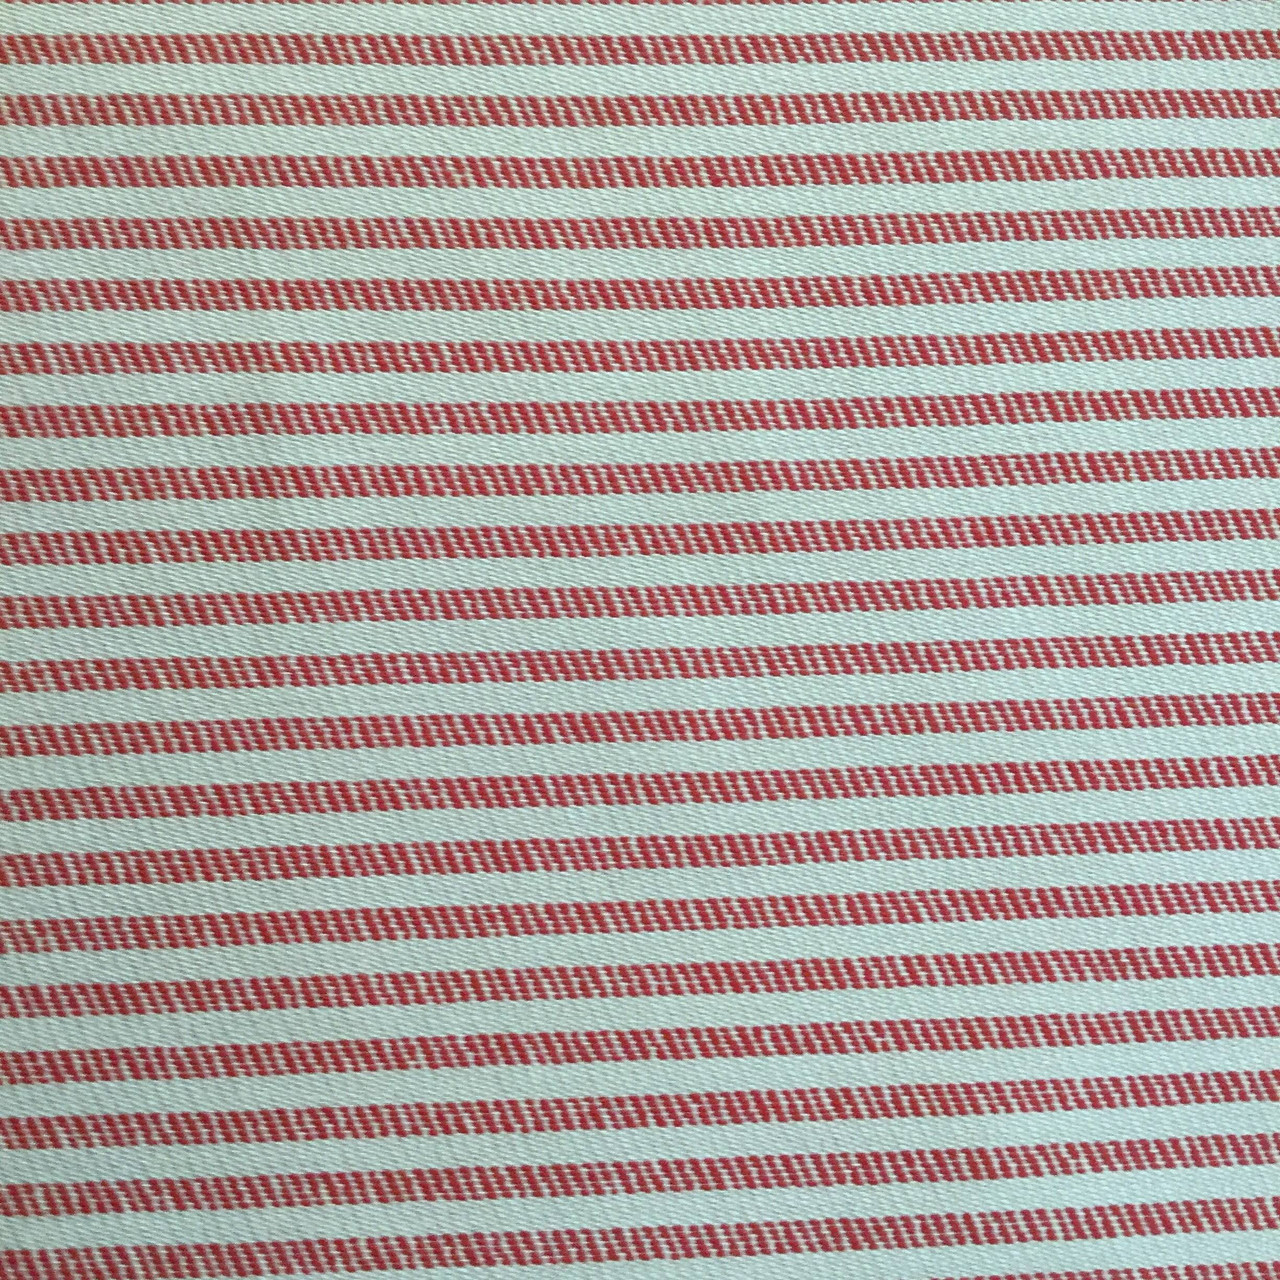 Ticking Fabric by The Yard - 54 Wide